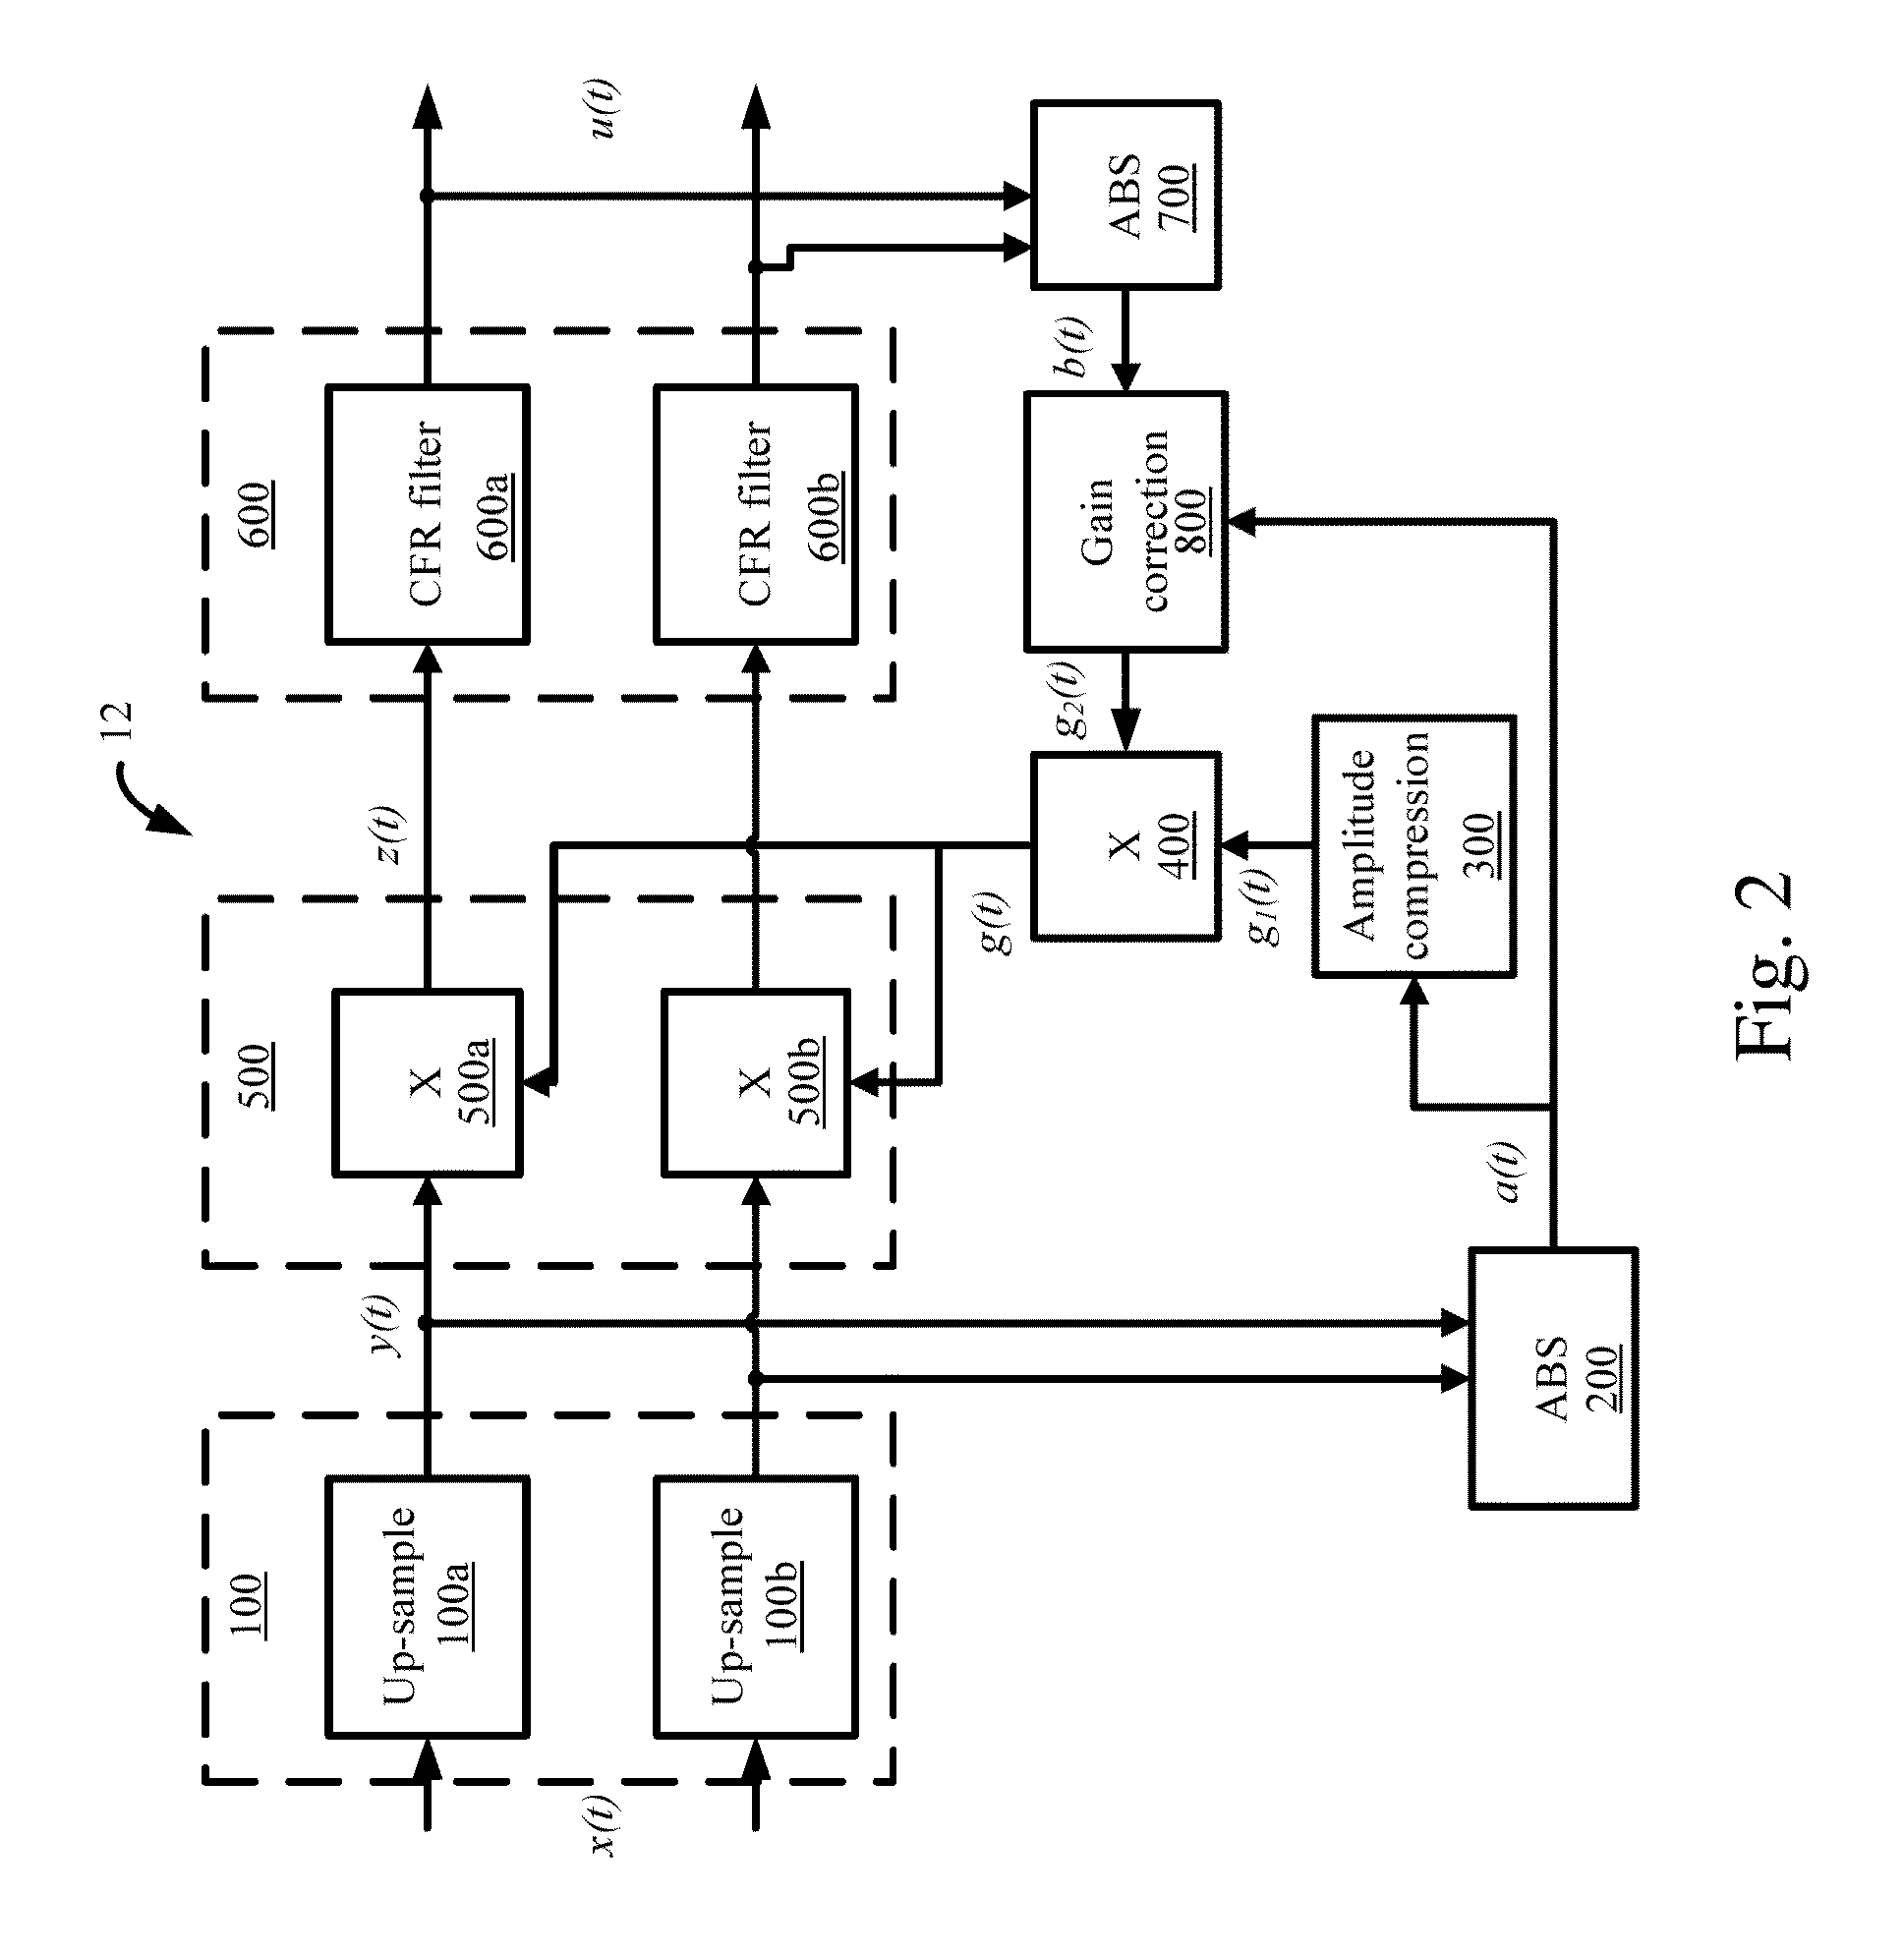 Communication device and method of crest factor reduction using amplitude compression